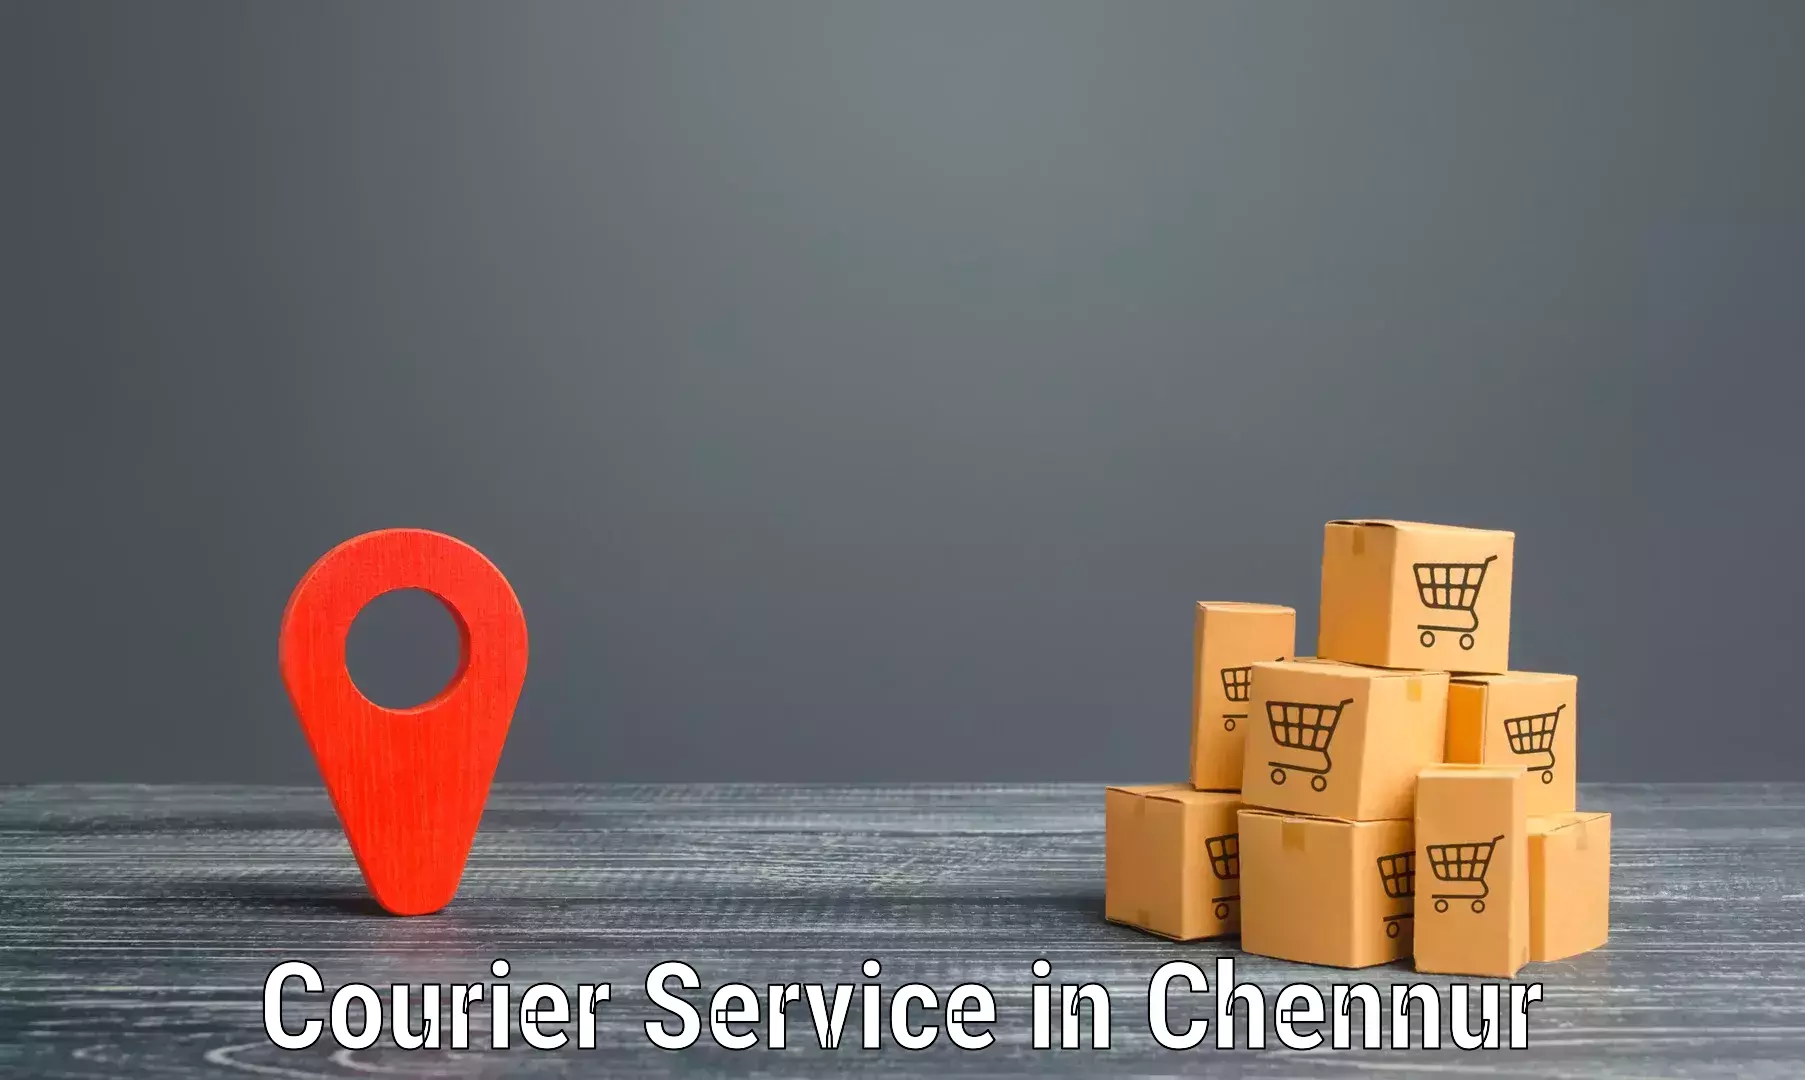 Tailored shipping plans in Chennur